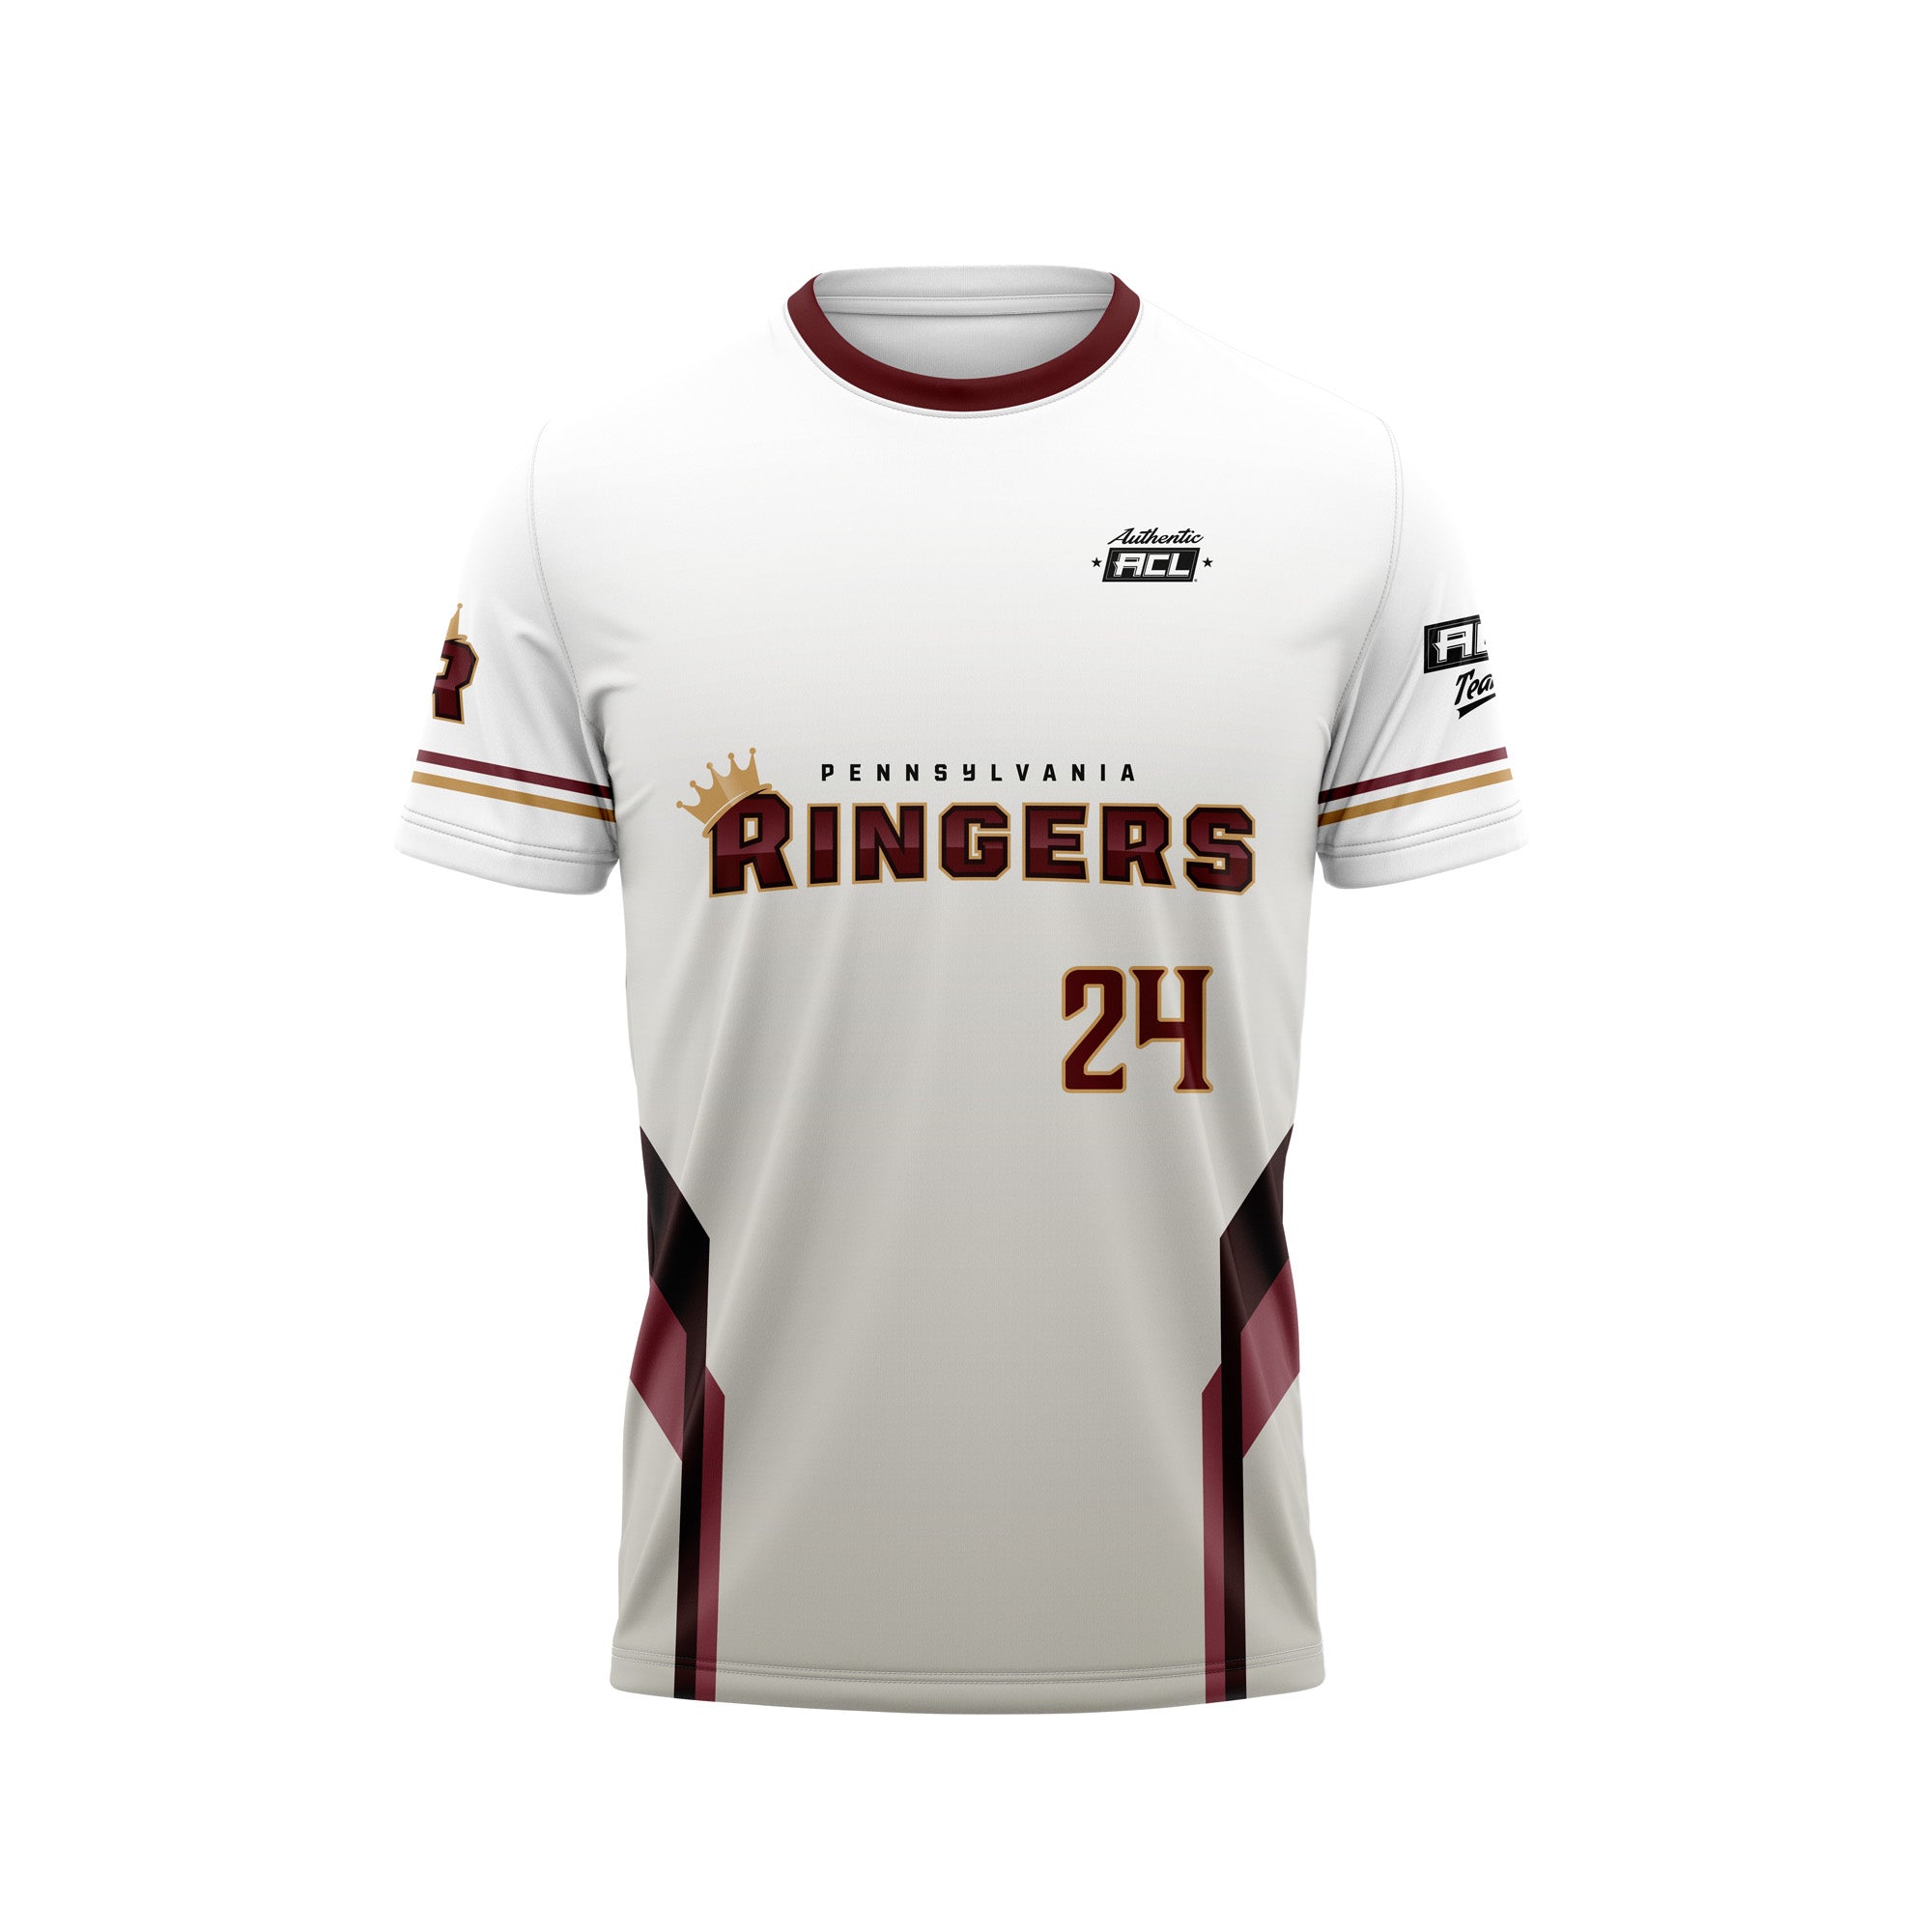 ACL Teams Sport Jersey - Pennsylvania Ringers